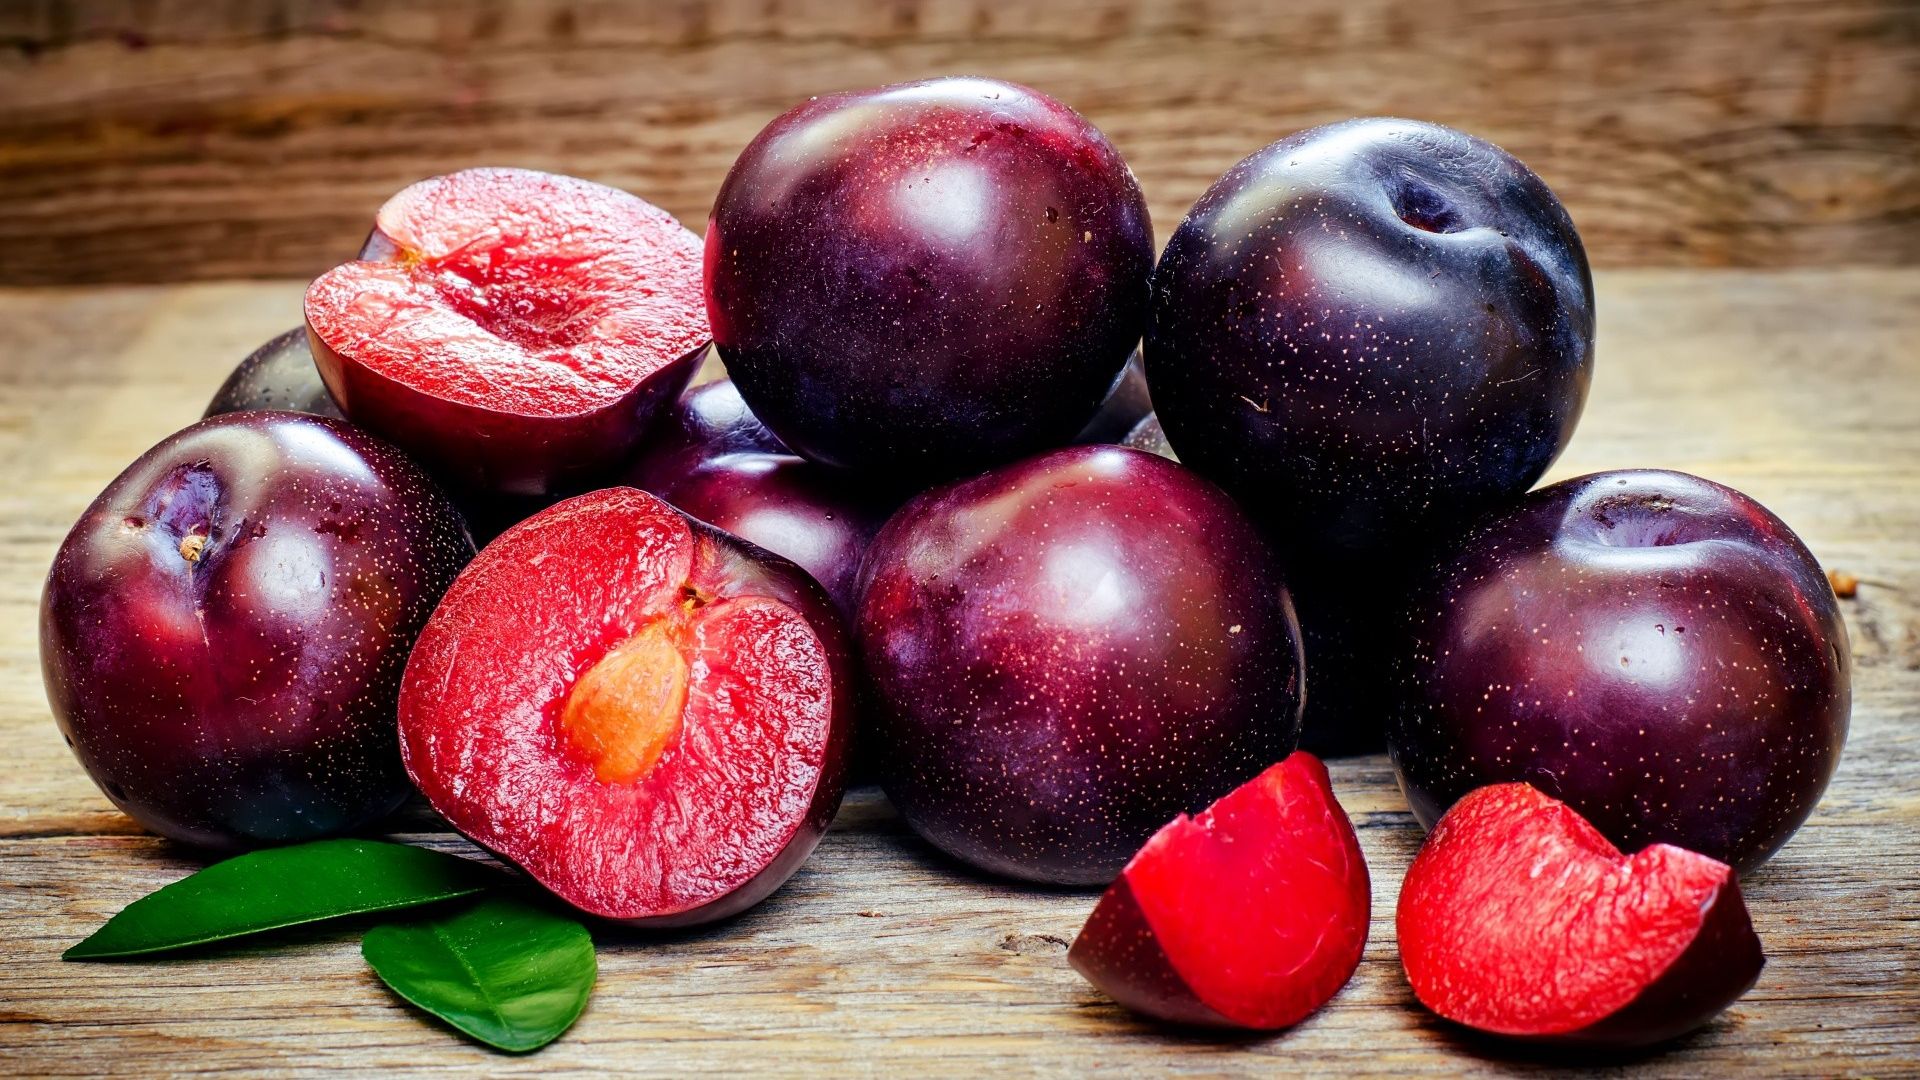 Plum Fruits Hd Wallpaper - Plum This Is Just To Say - HD Wallpaper 